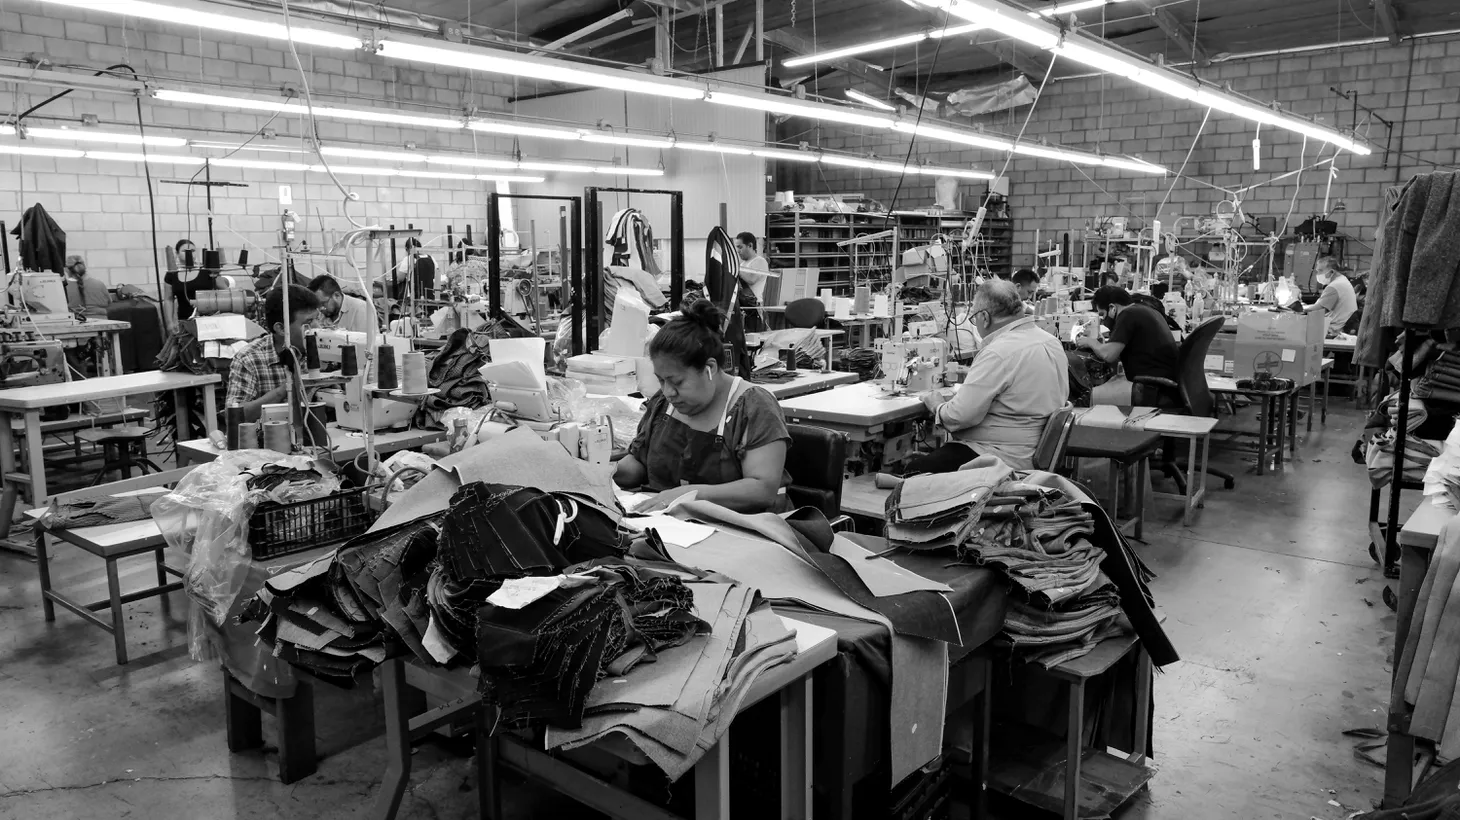 Under fluorescent light, men and women stay focused during the work day at 9B Apparel in Huntington Park. August 26, 2022.